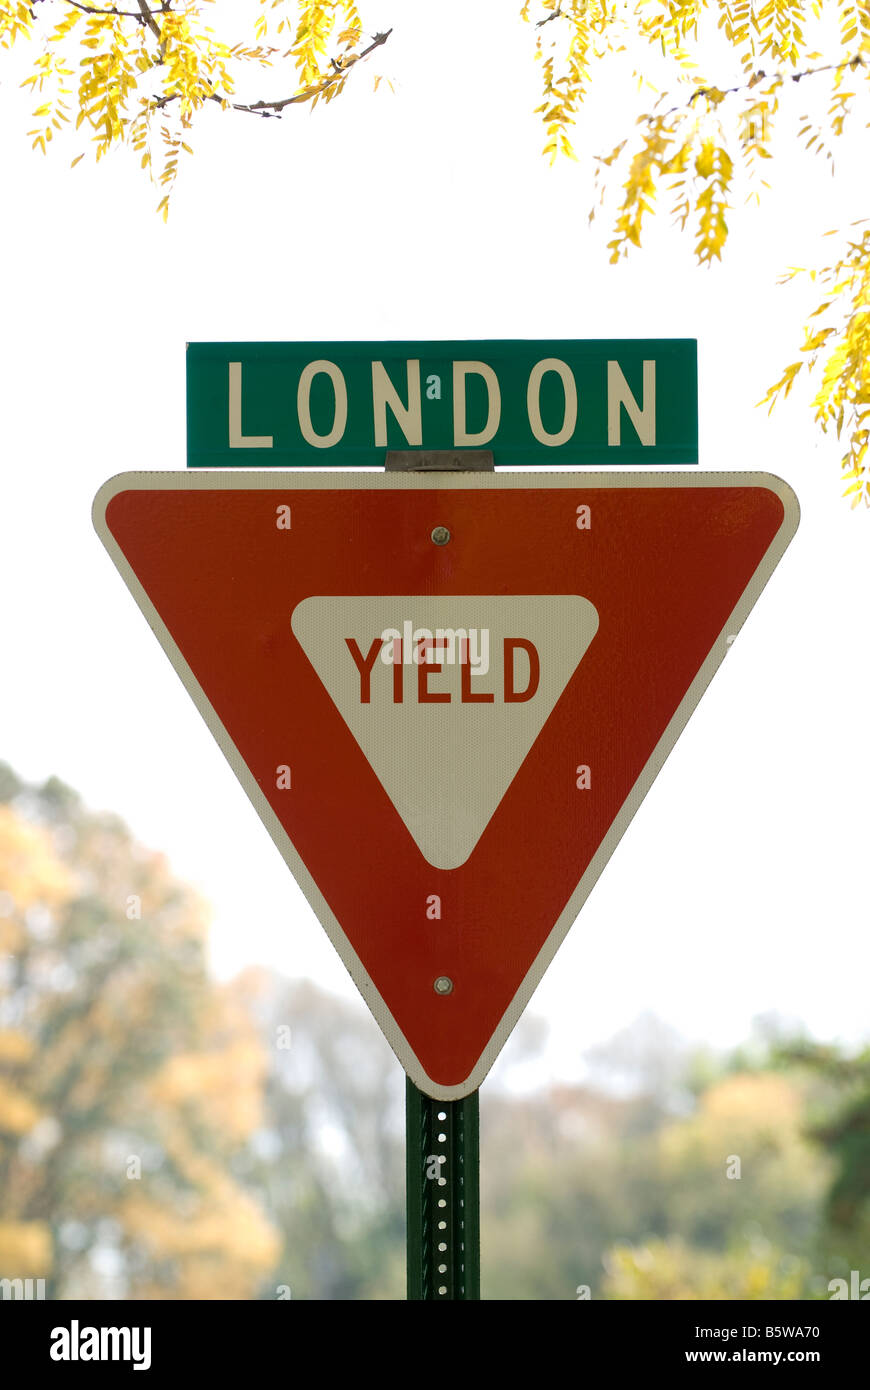 London street sign with Yield sign Stock Photo